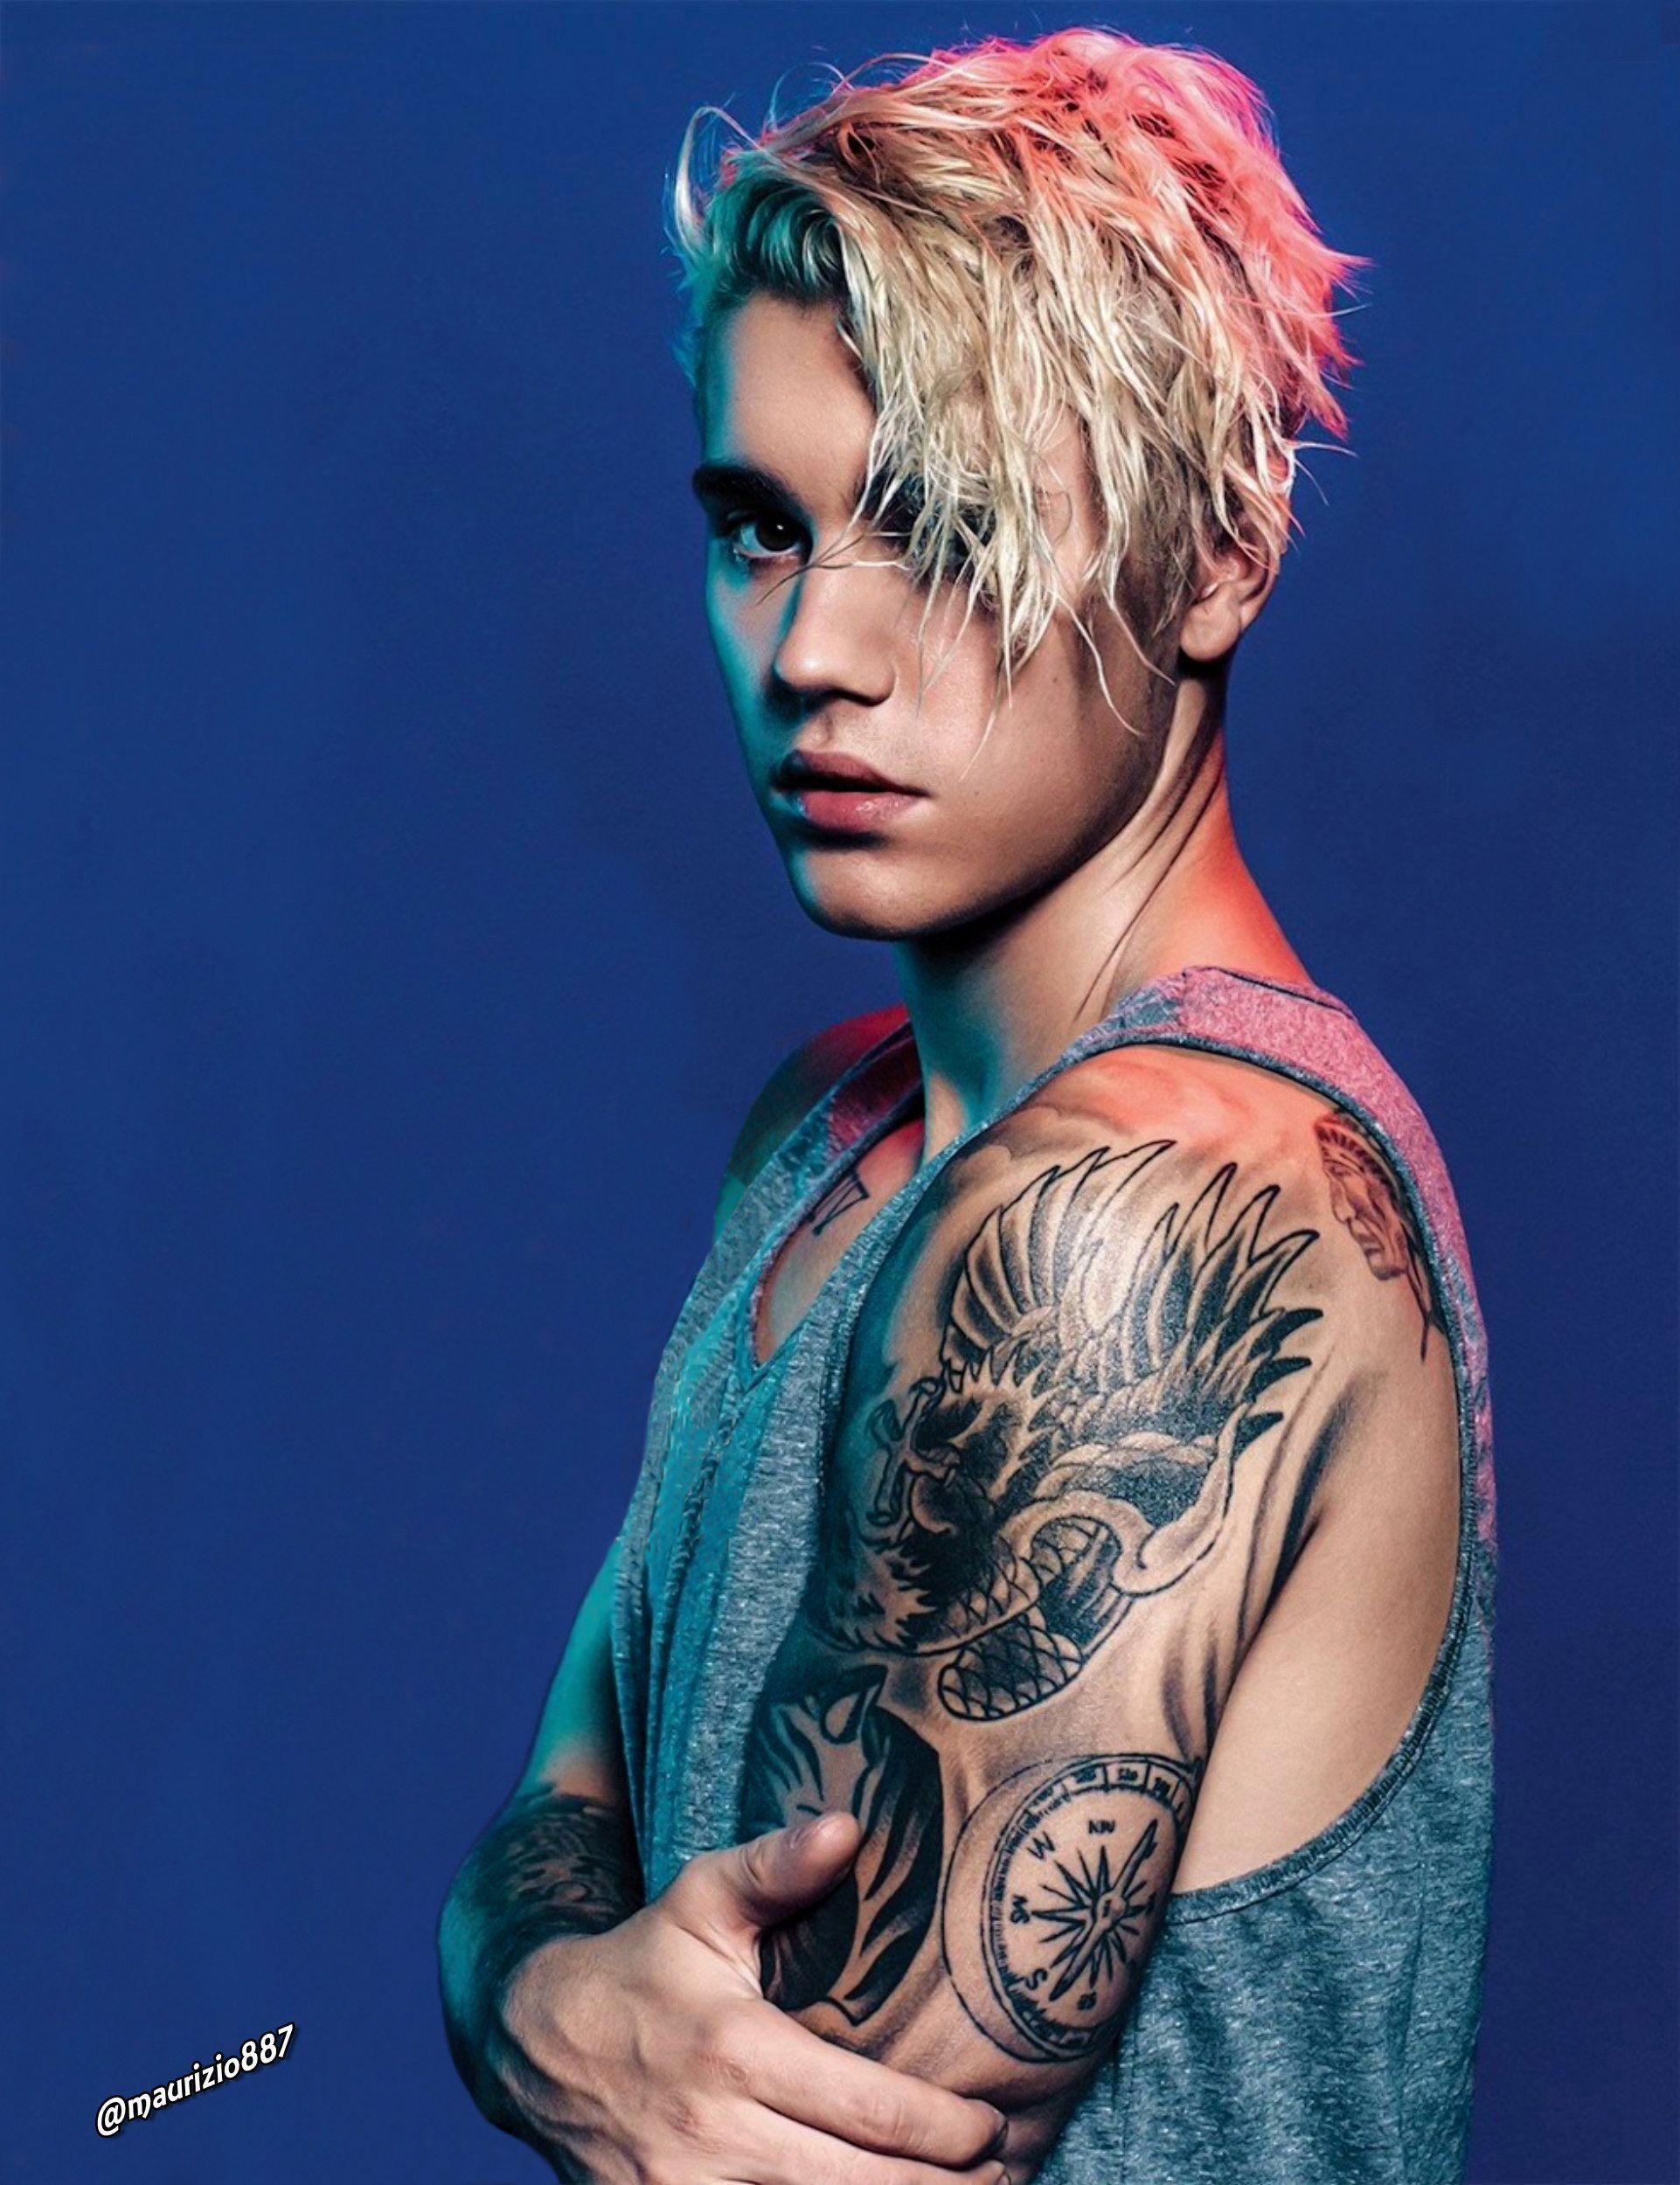 Justin Bieber New Wallpapers 2016